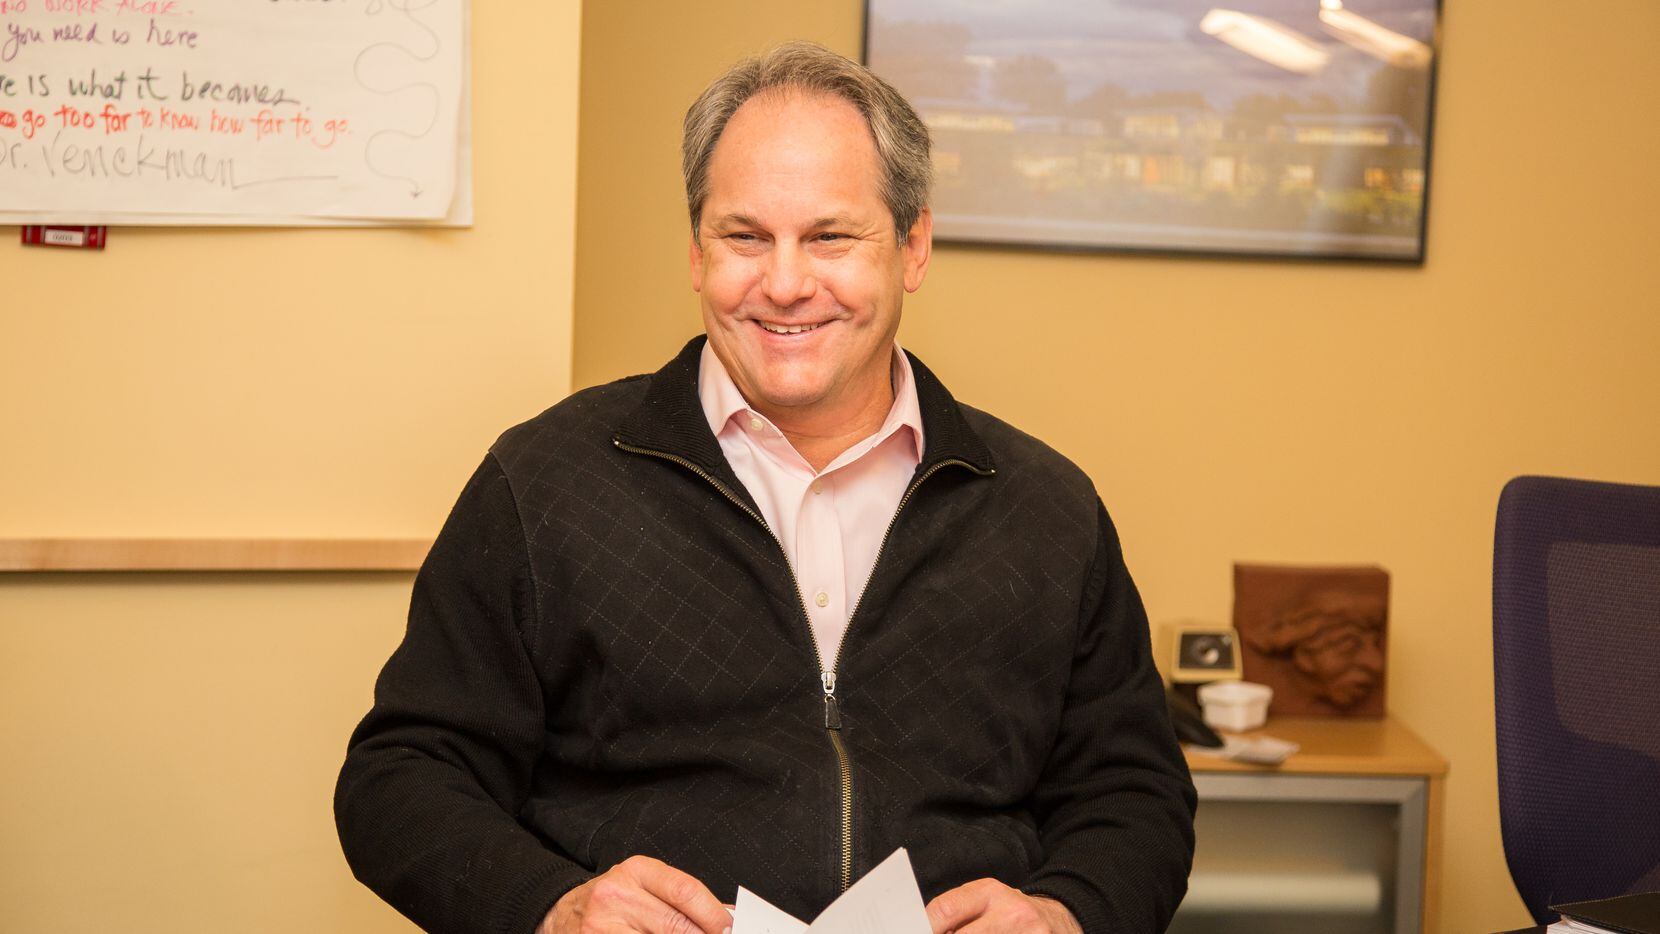 Jay Brotman is managing partner at Svigals + Partners and a Thomas Jefferson graduate who...